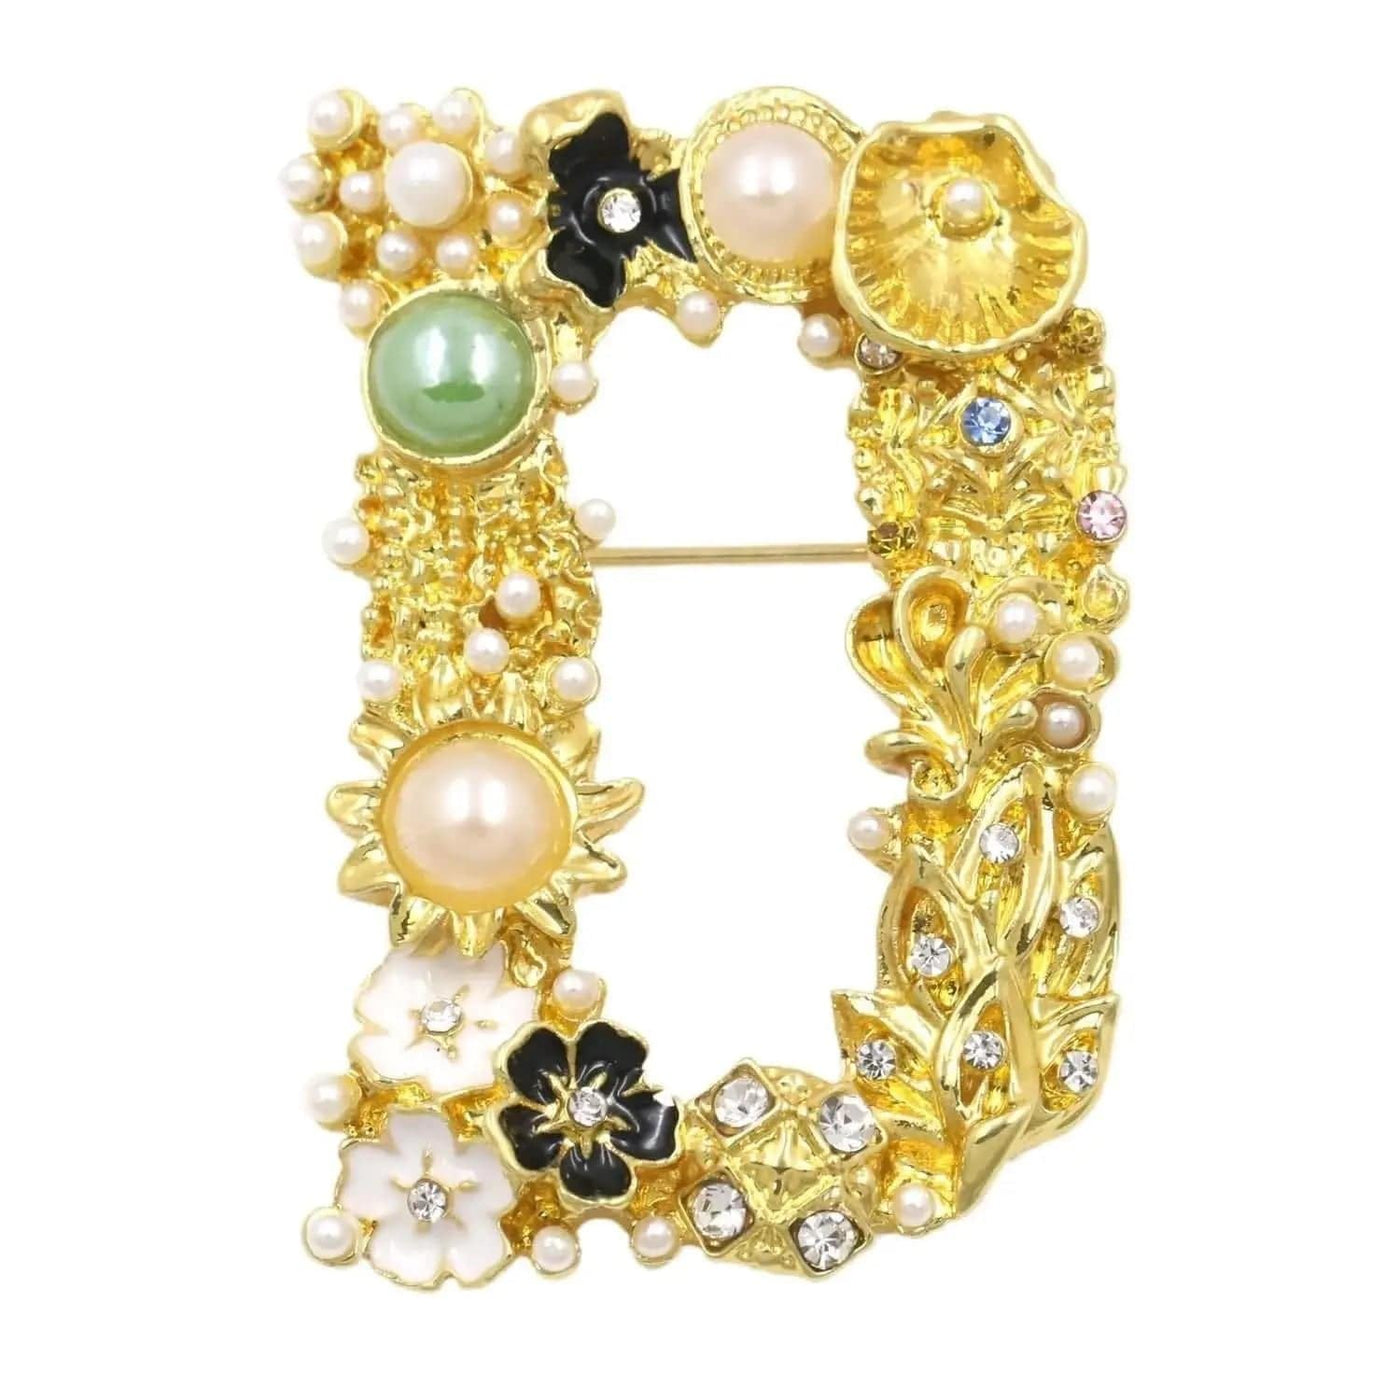 BROOCHITON Brooches The letter D Pearl English letter brooch Pin